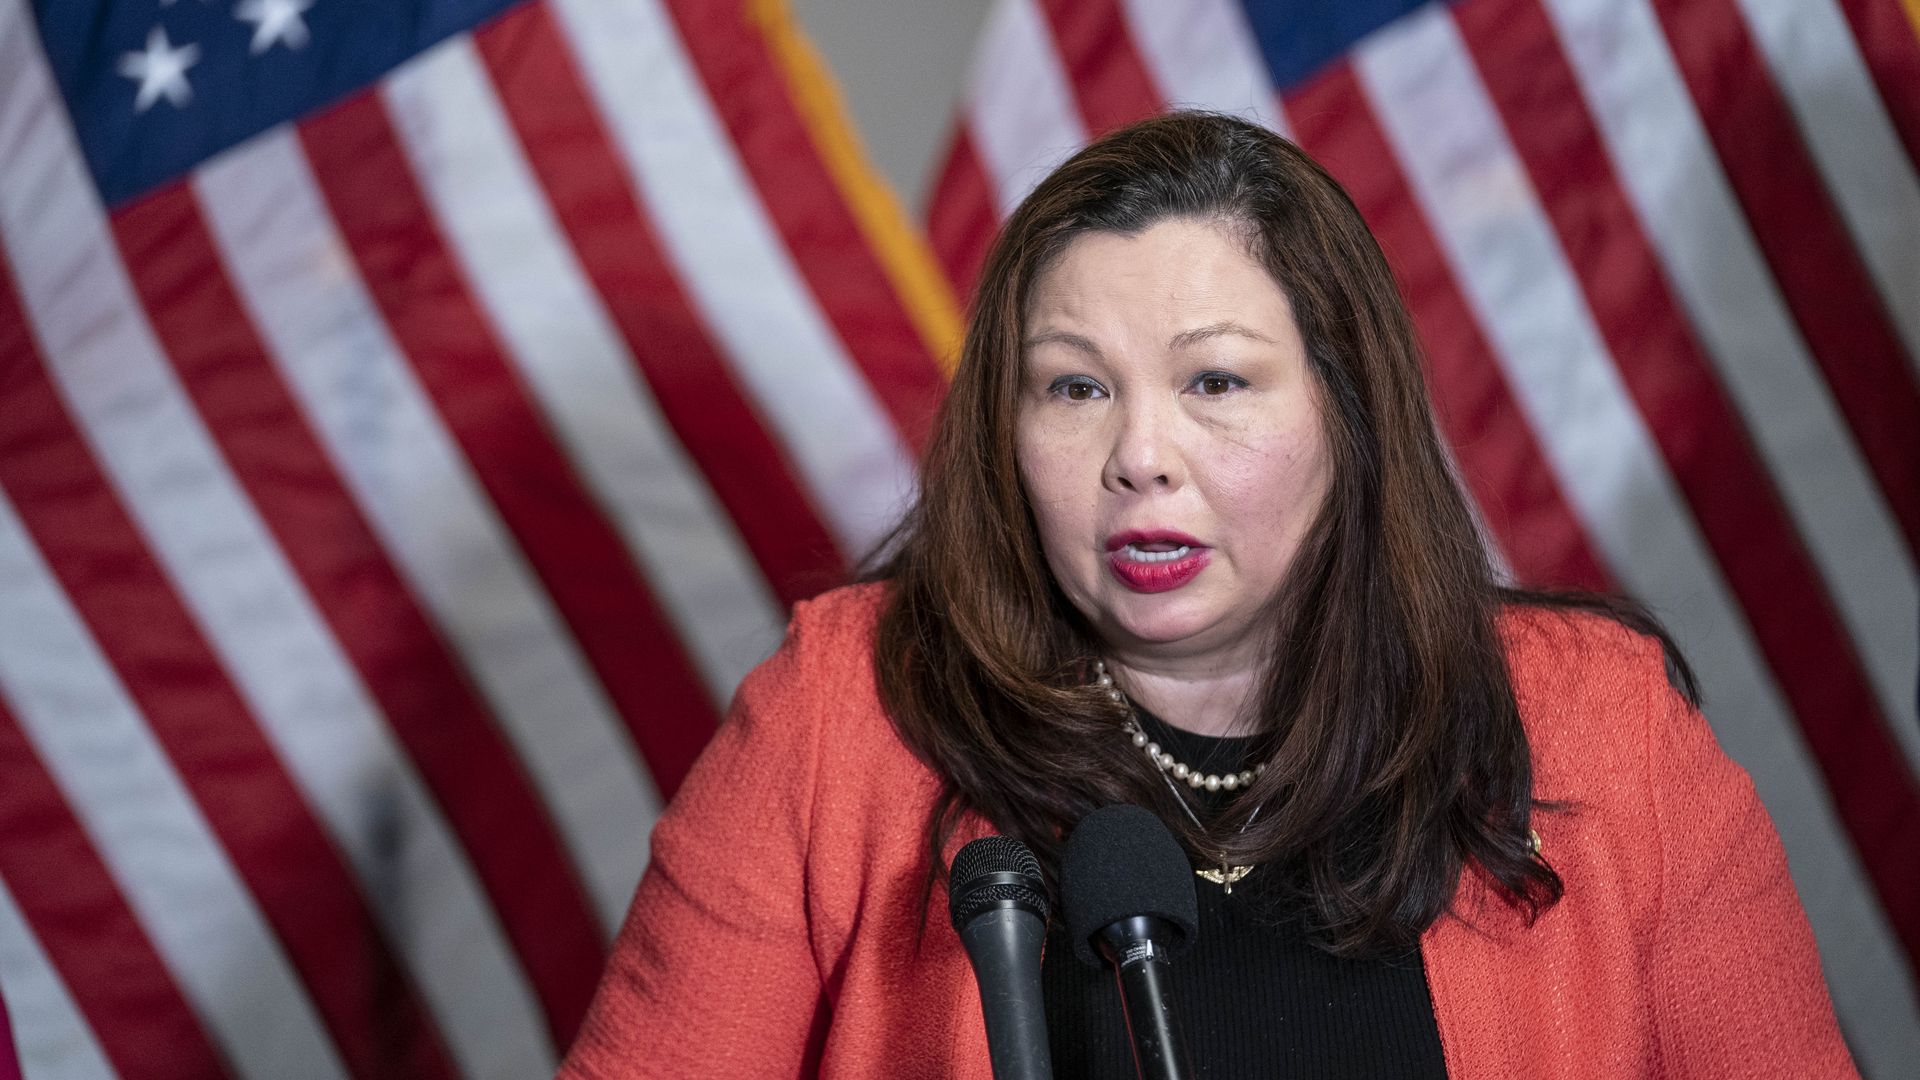  Sen. Tammy Duckworth (D-IL) speaks during a news conference following the weekly Democrat policy luncheon on Capitol Hill on April 20, 2021 in Washington, DC.